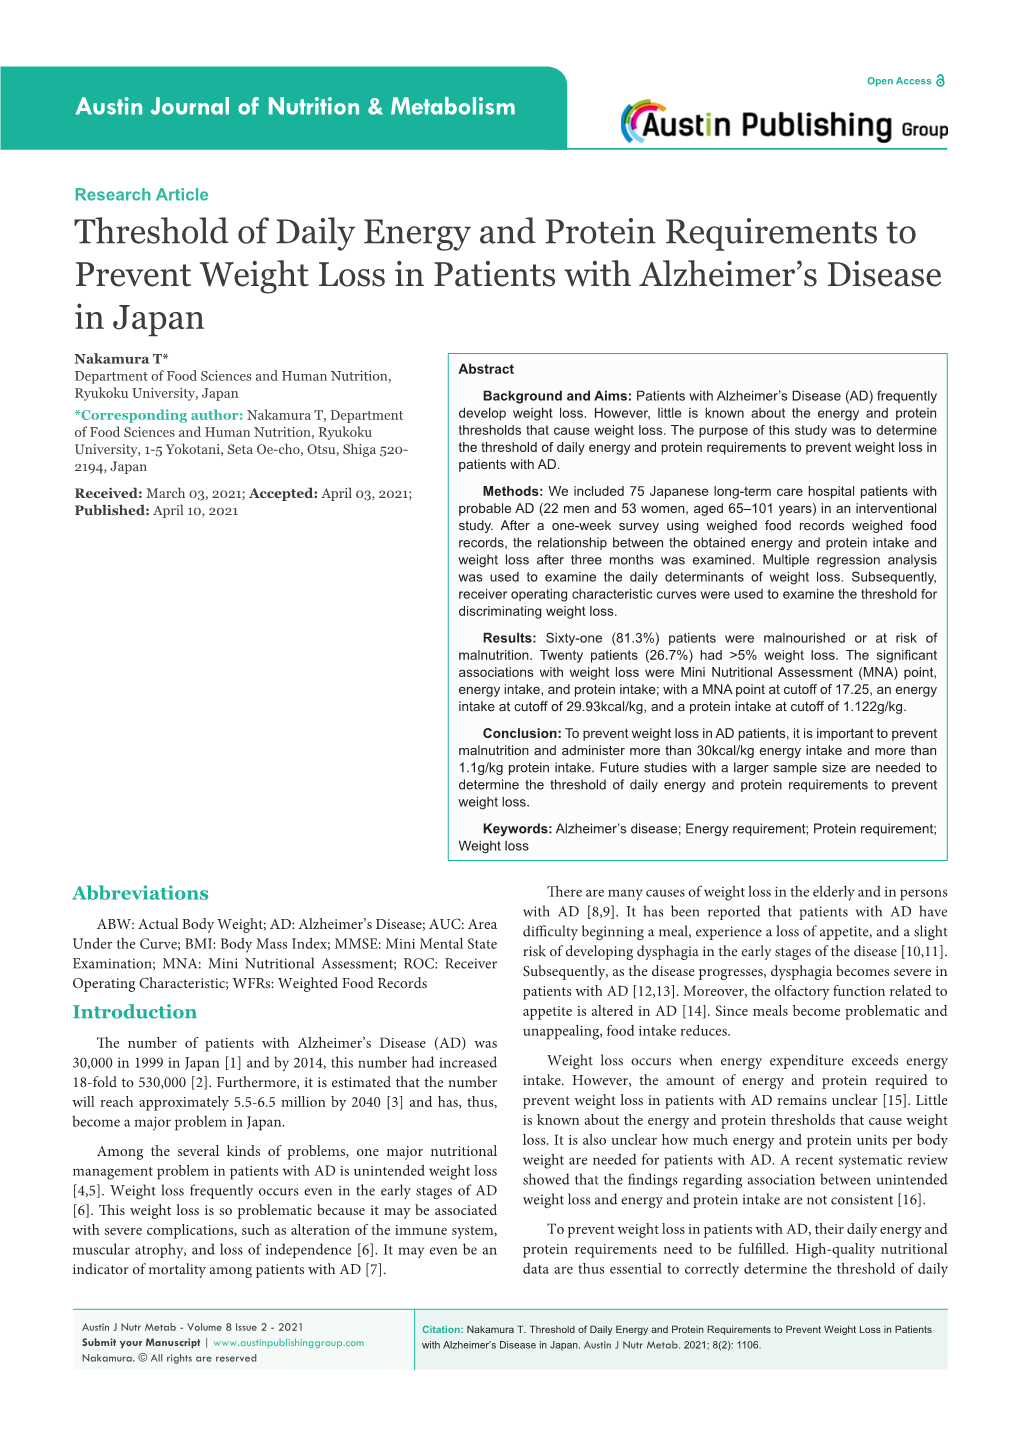 Threshold of Daily Energy and Protein Requirements to Prevent Weight Loss in Patients with Alzheimer’S Disease in Japan